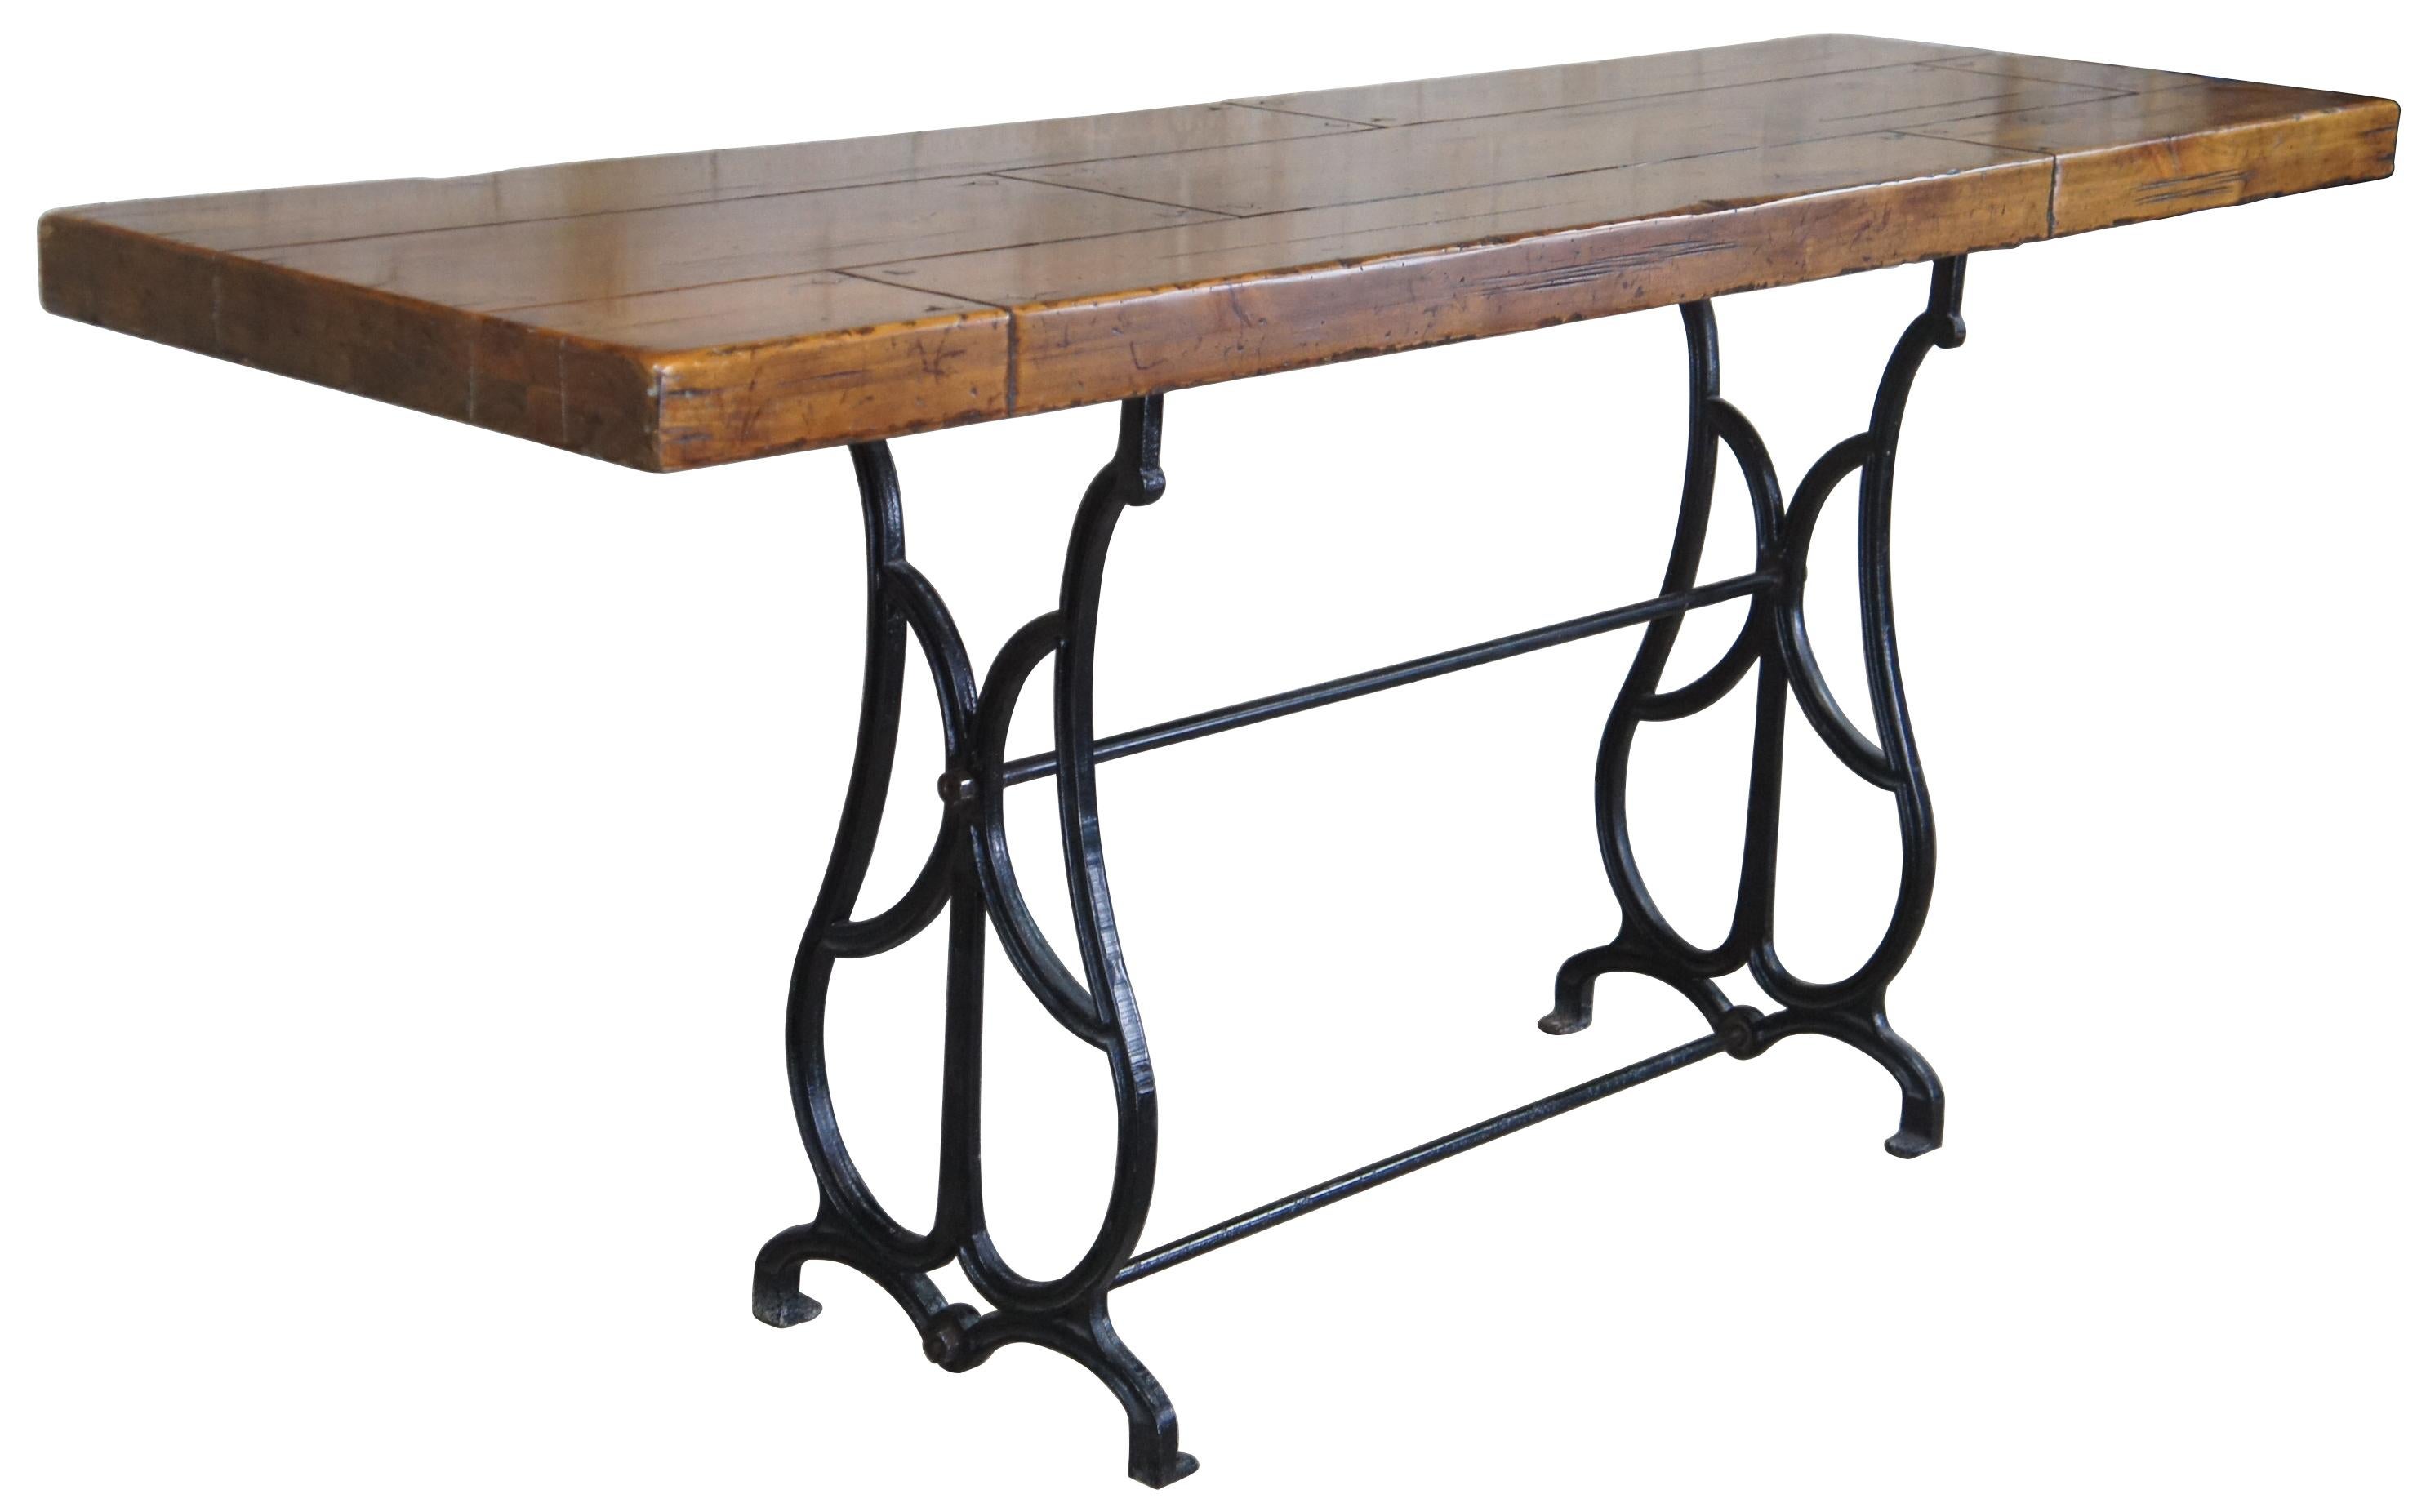 A unique pairing of transitional and antique styling. Features a Century Furniture distressed pine plank top over an antique Iron base. Great for use in an entry console, hallway or sofa table. The top is from 2005 while the base is from the early